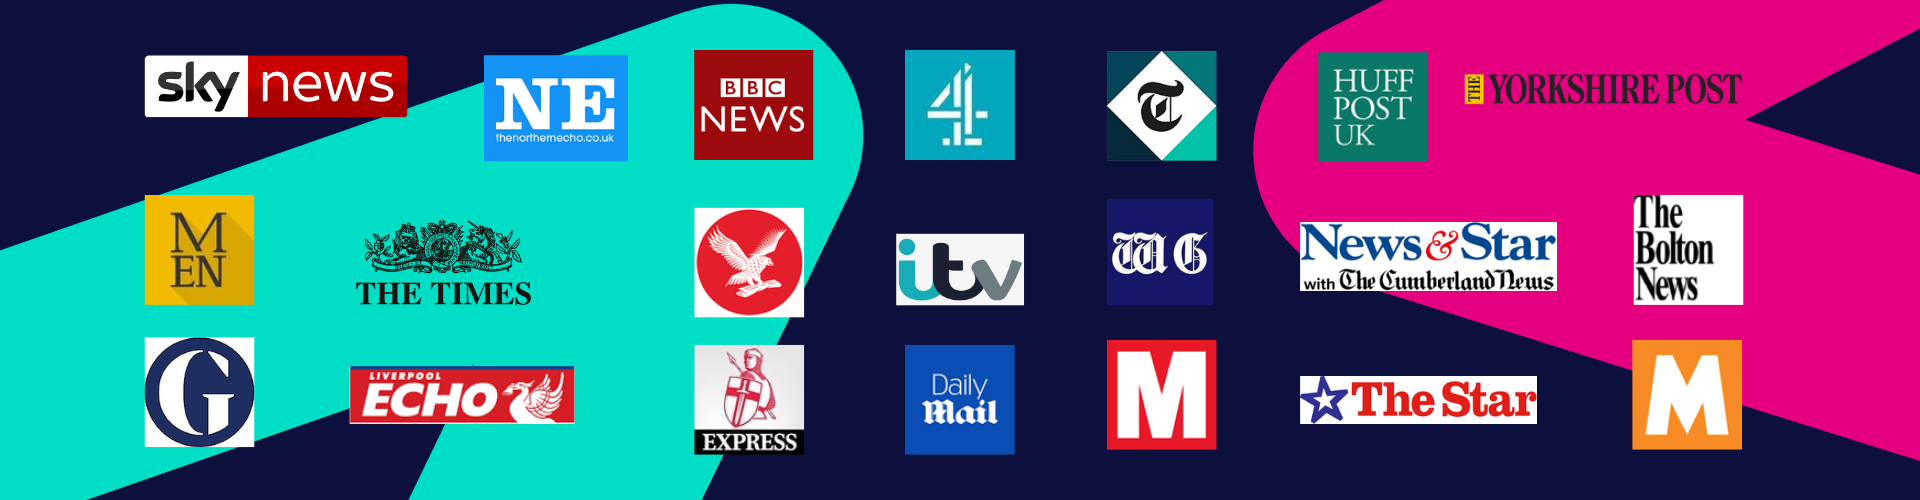 media banner with icons of various media outlets